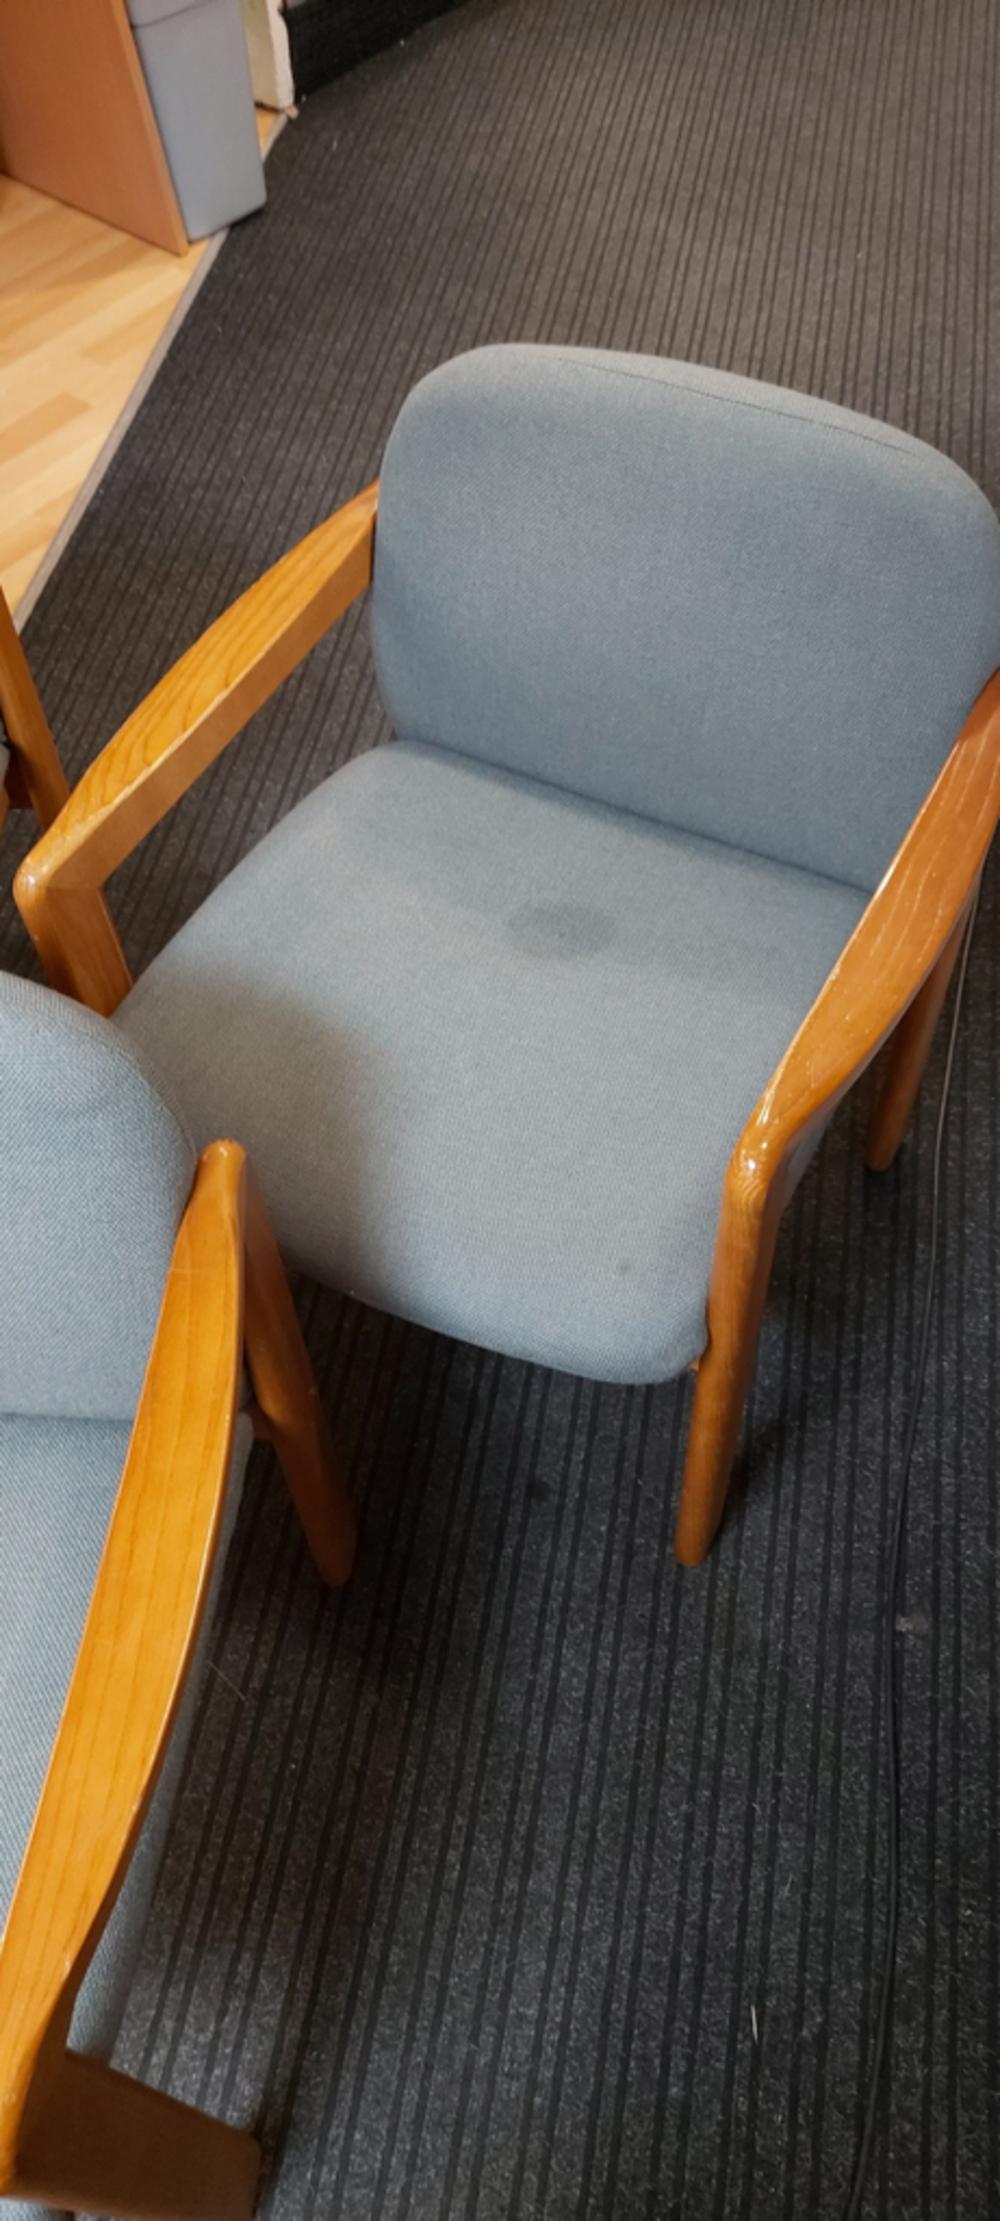 Set Of 3 Low Reception Chairs